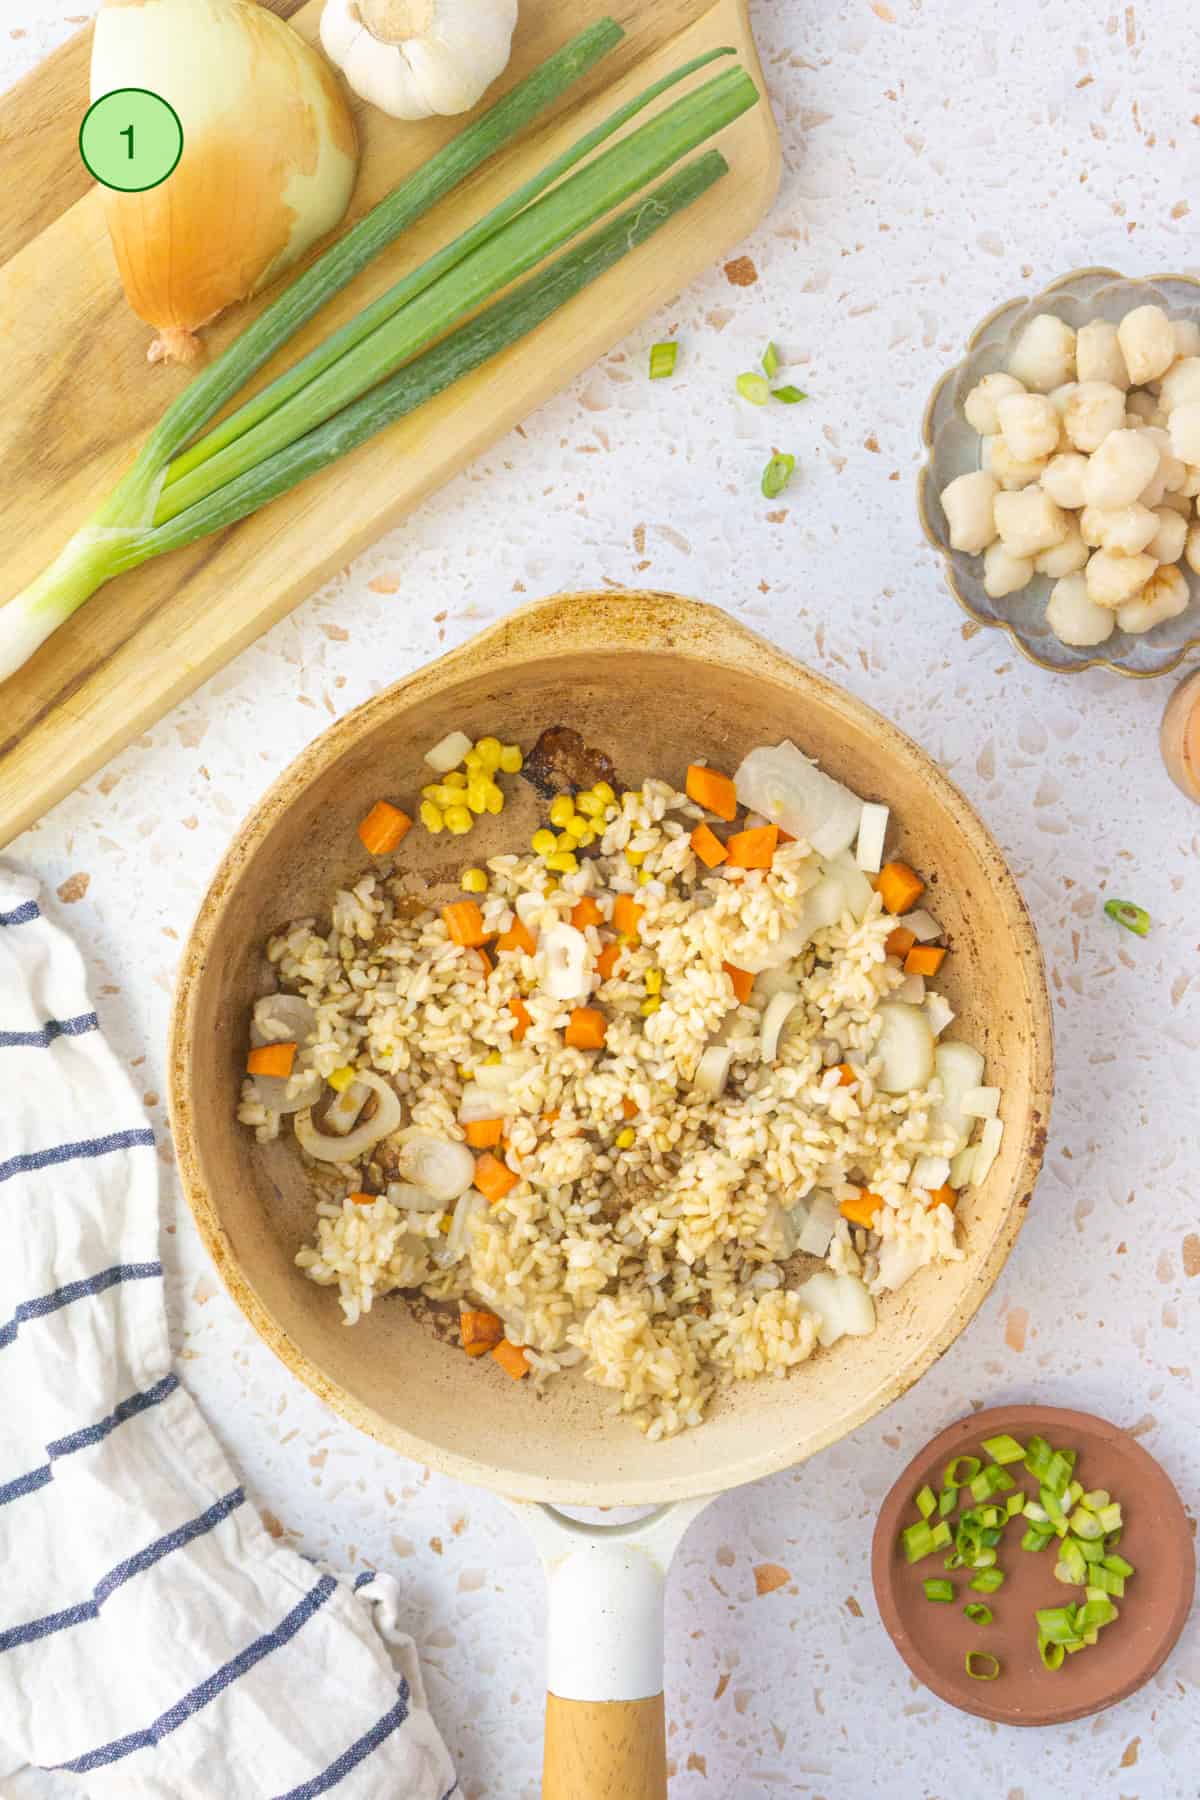 Cooking the scallop fried rice in a skillet.